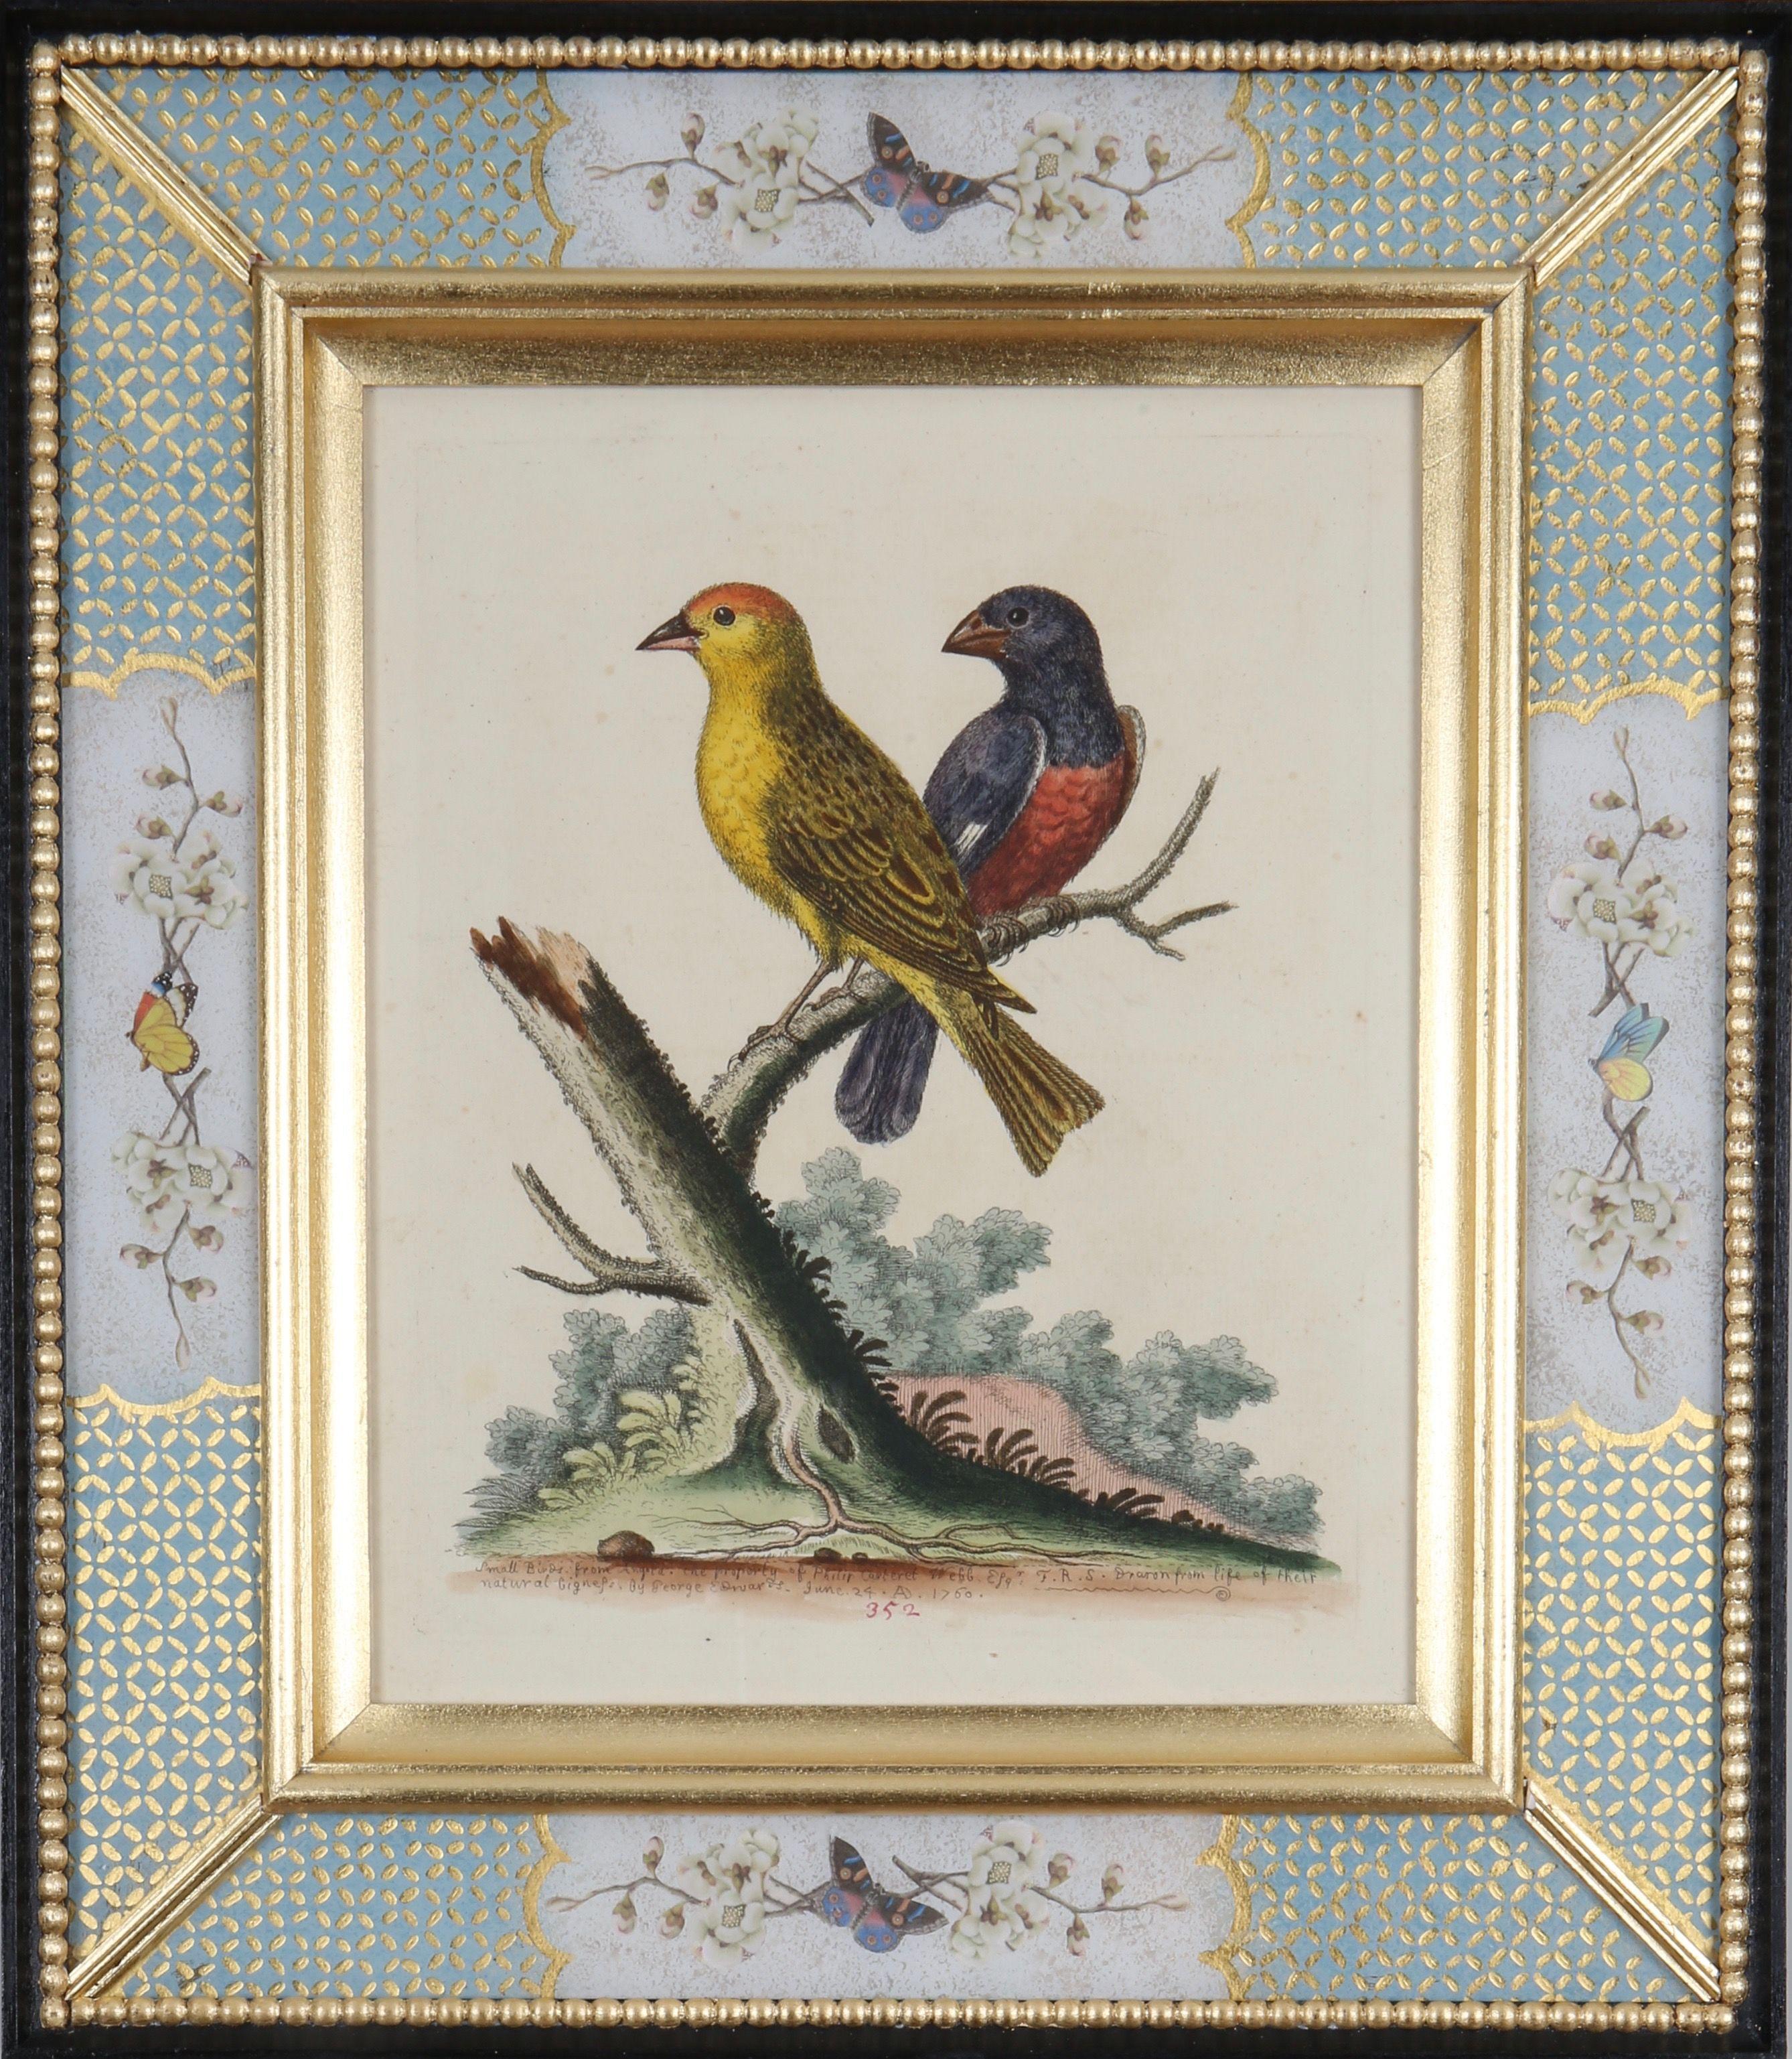 George Edwards: "A History of Uncommon Birds", 1749-1761.

A prominent English naturalist and ornithologist, George Edwards (1694 -1773) is best known for his work, ""A Natural History of Uncommon Birds"", which he published between 1743 and 1761